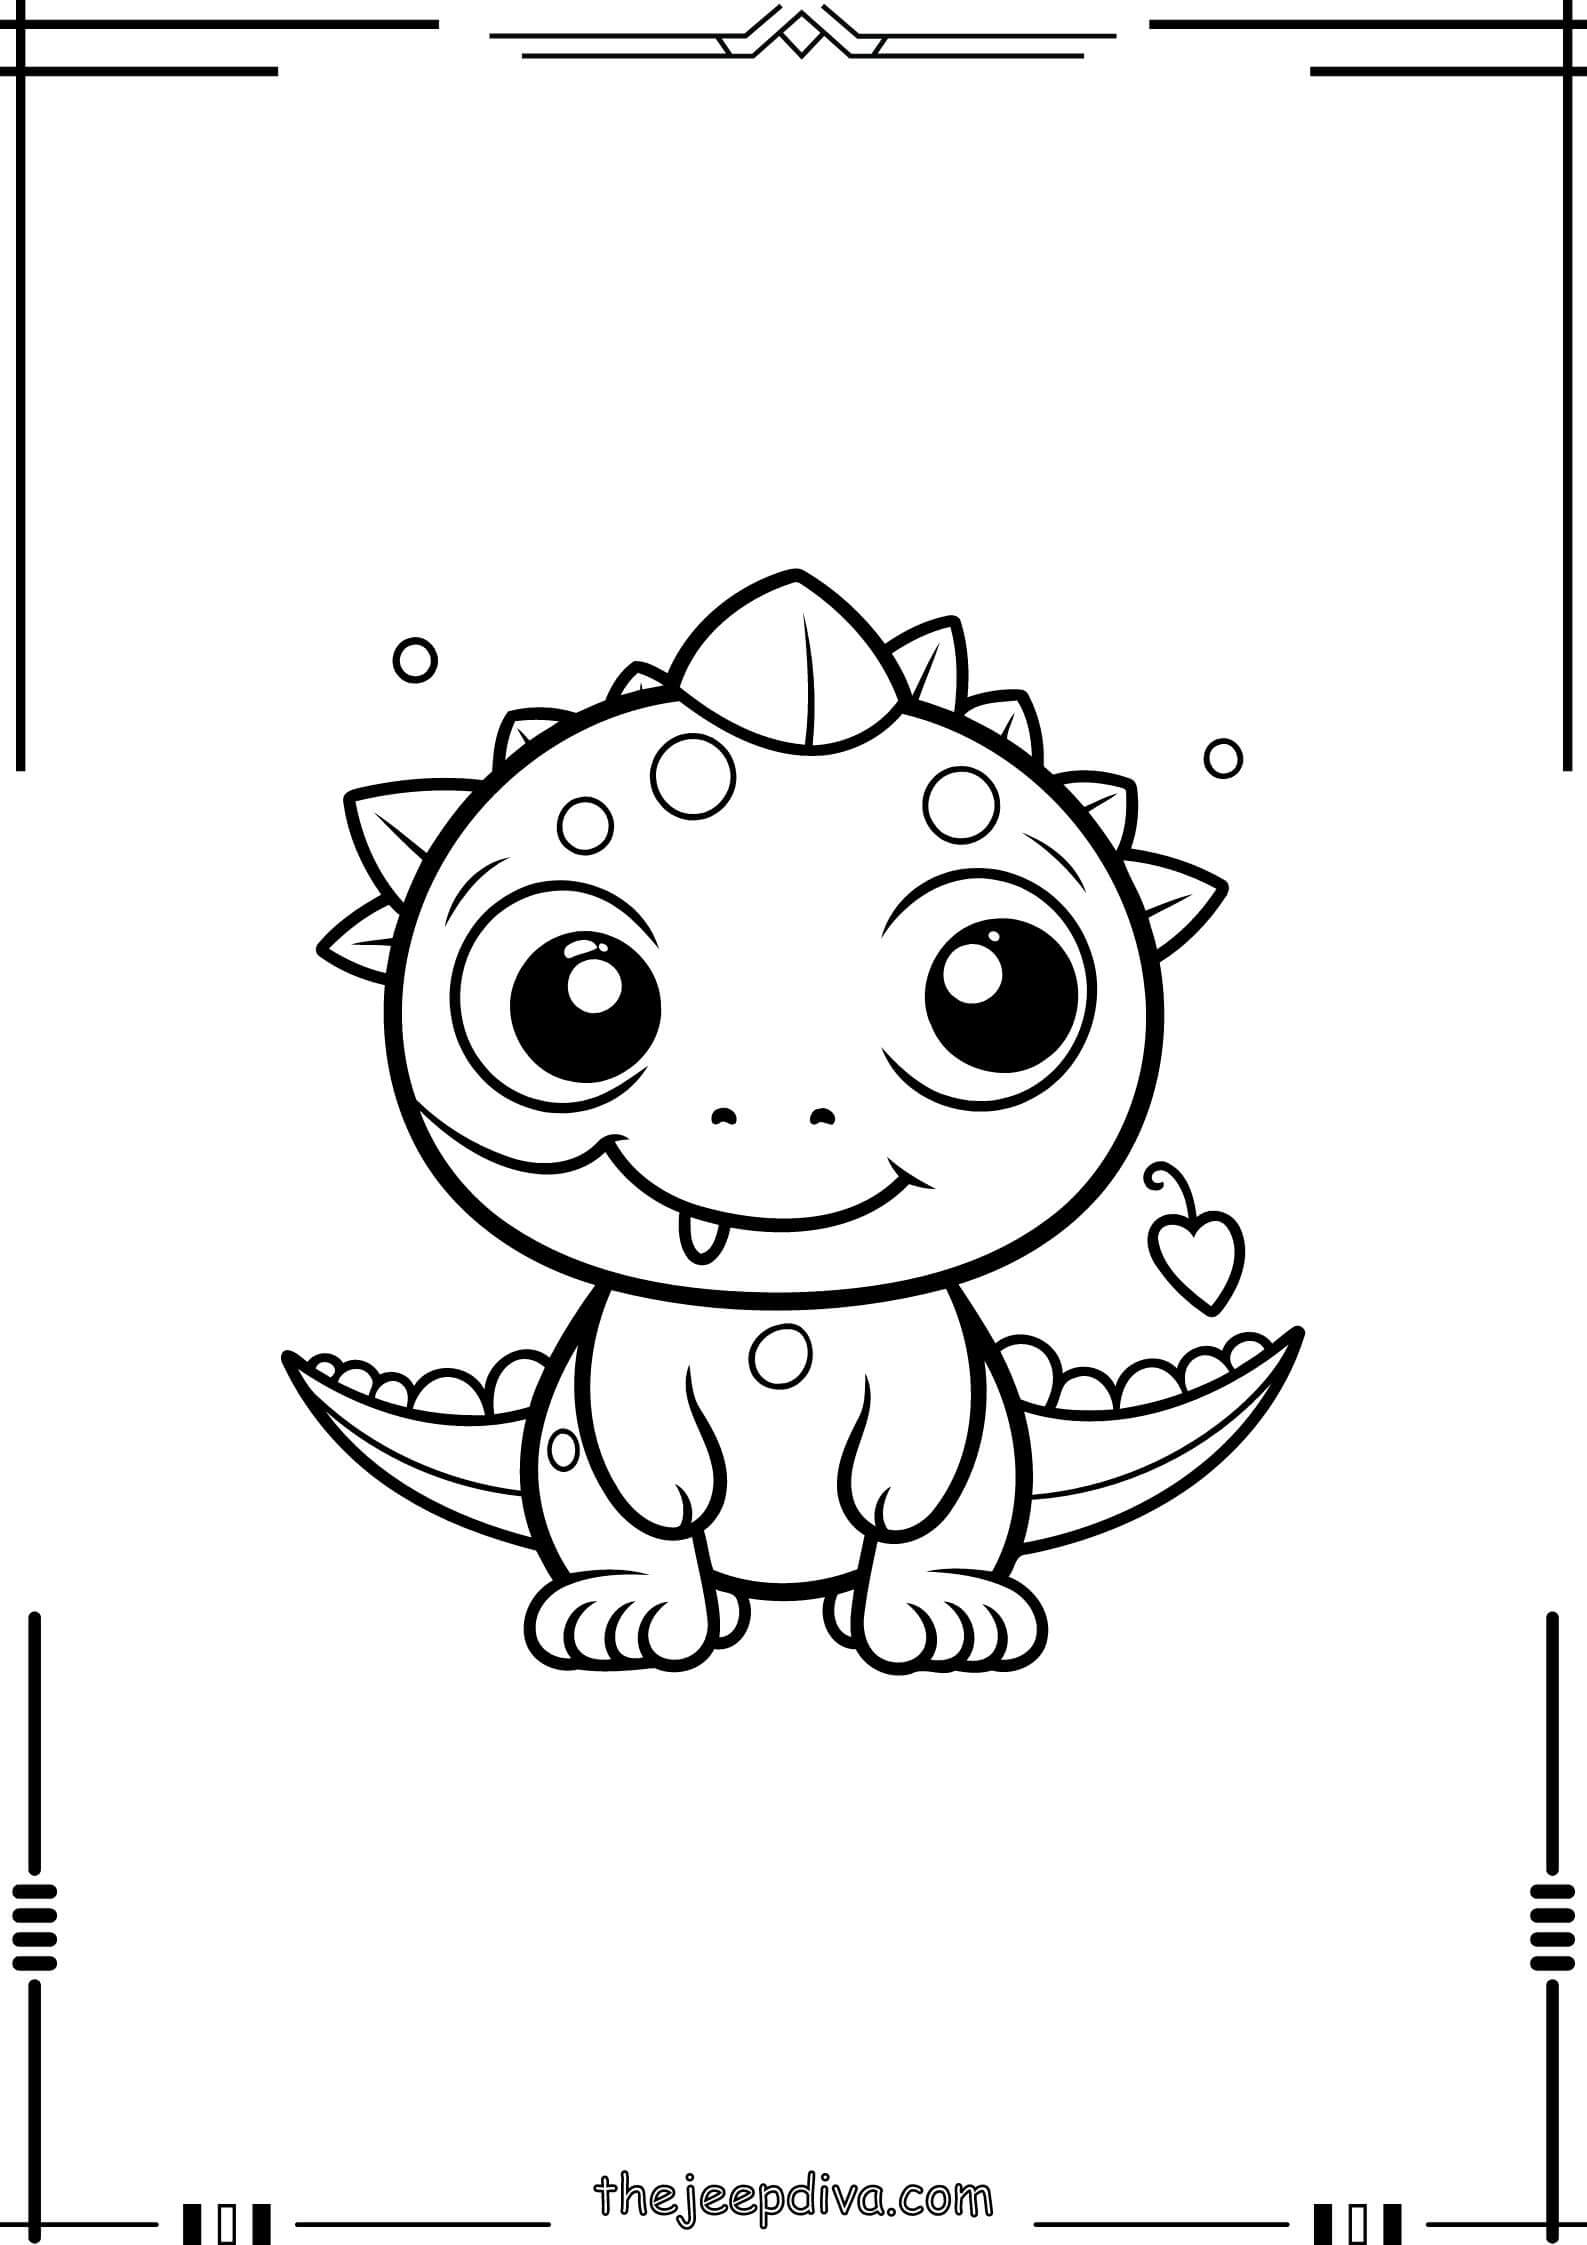 Dinosaur-Colouring-Pages-Easy-15